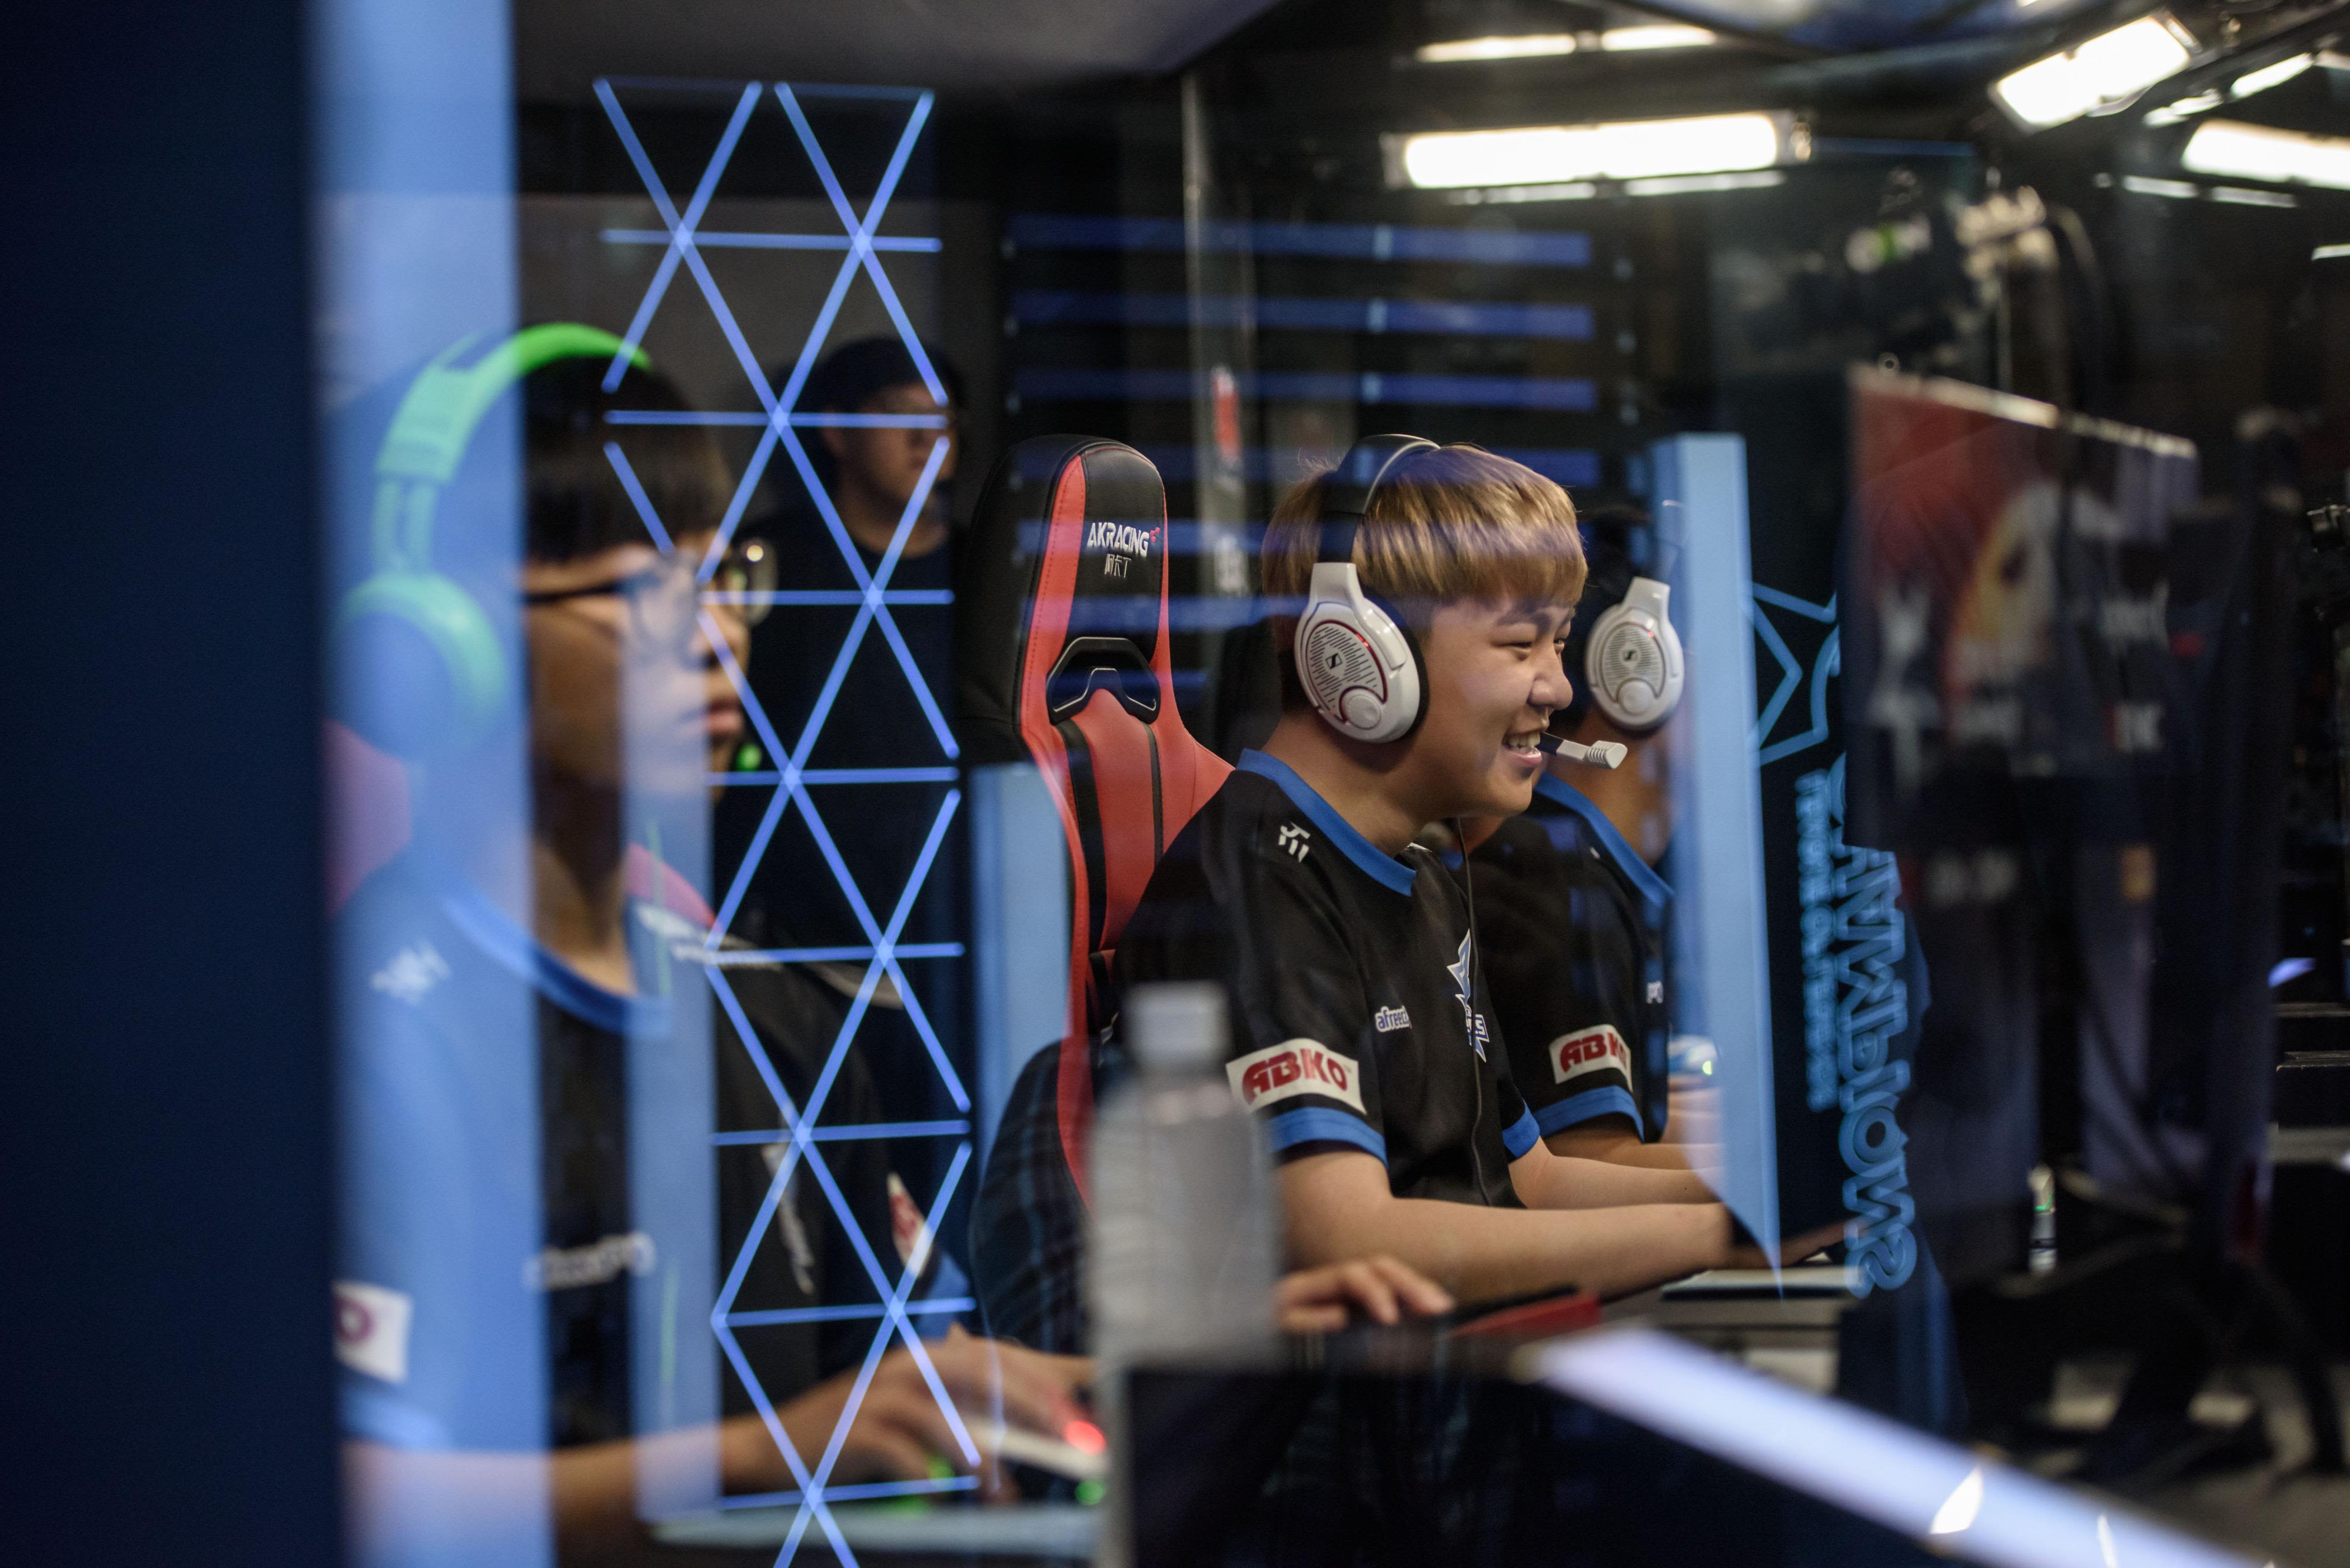 Esports in Seoul: Everything you need to know about attending an